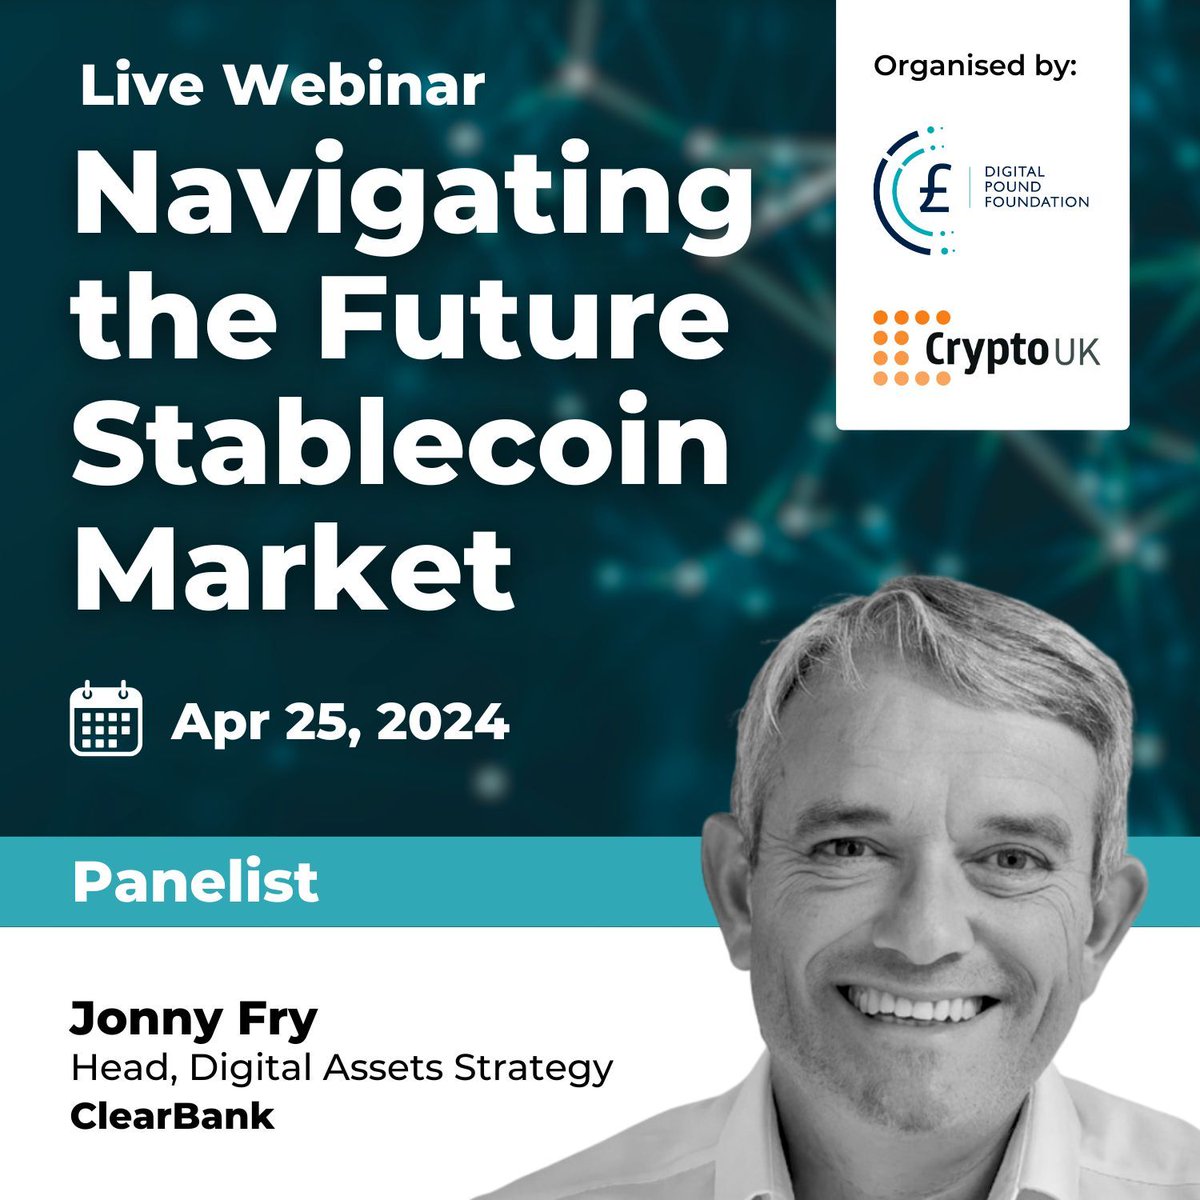 .@jonnyfry175 from @clear_bank is joining us as a panellist on Thursday 25 April for our live webinar 'Navigating the Future Stablecoin Market'. Reserve your FREE place today 👉 buff.ly/3VRhjqI ... #Webinar #Fintech #DigitalPound #Stablecoin #Blockchain #Crypto